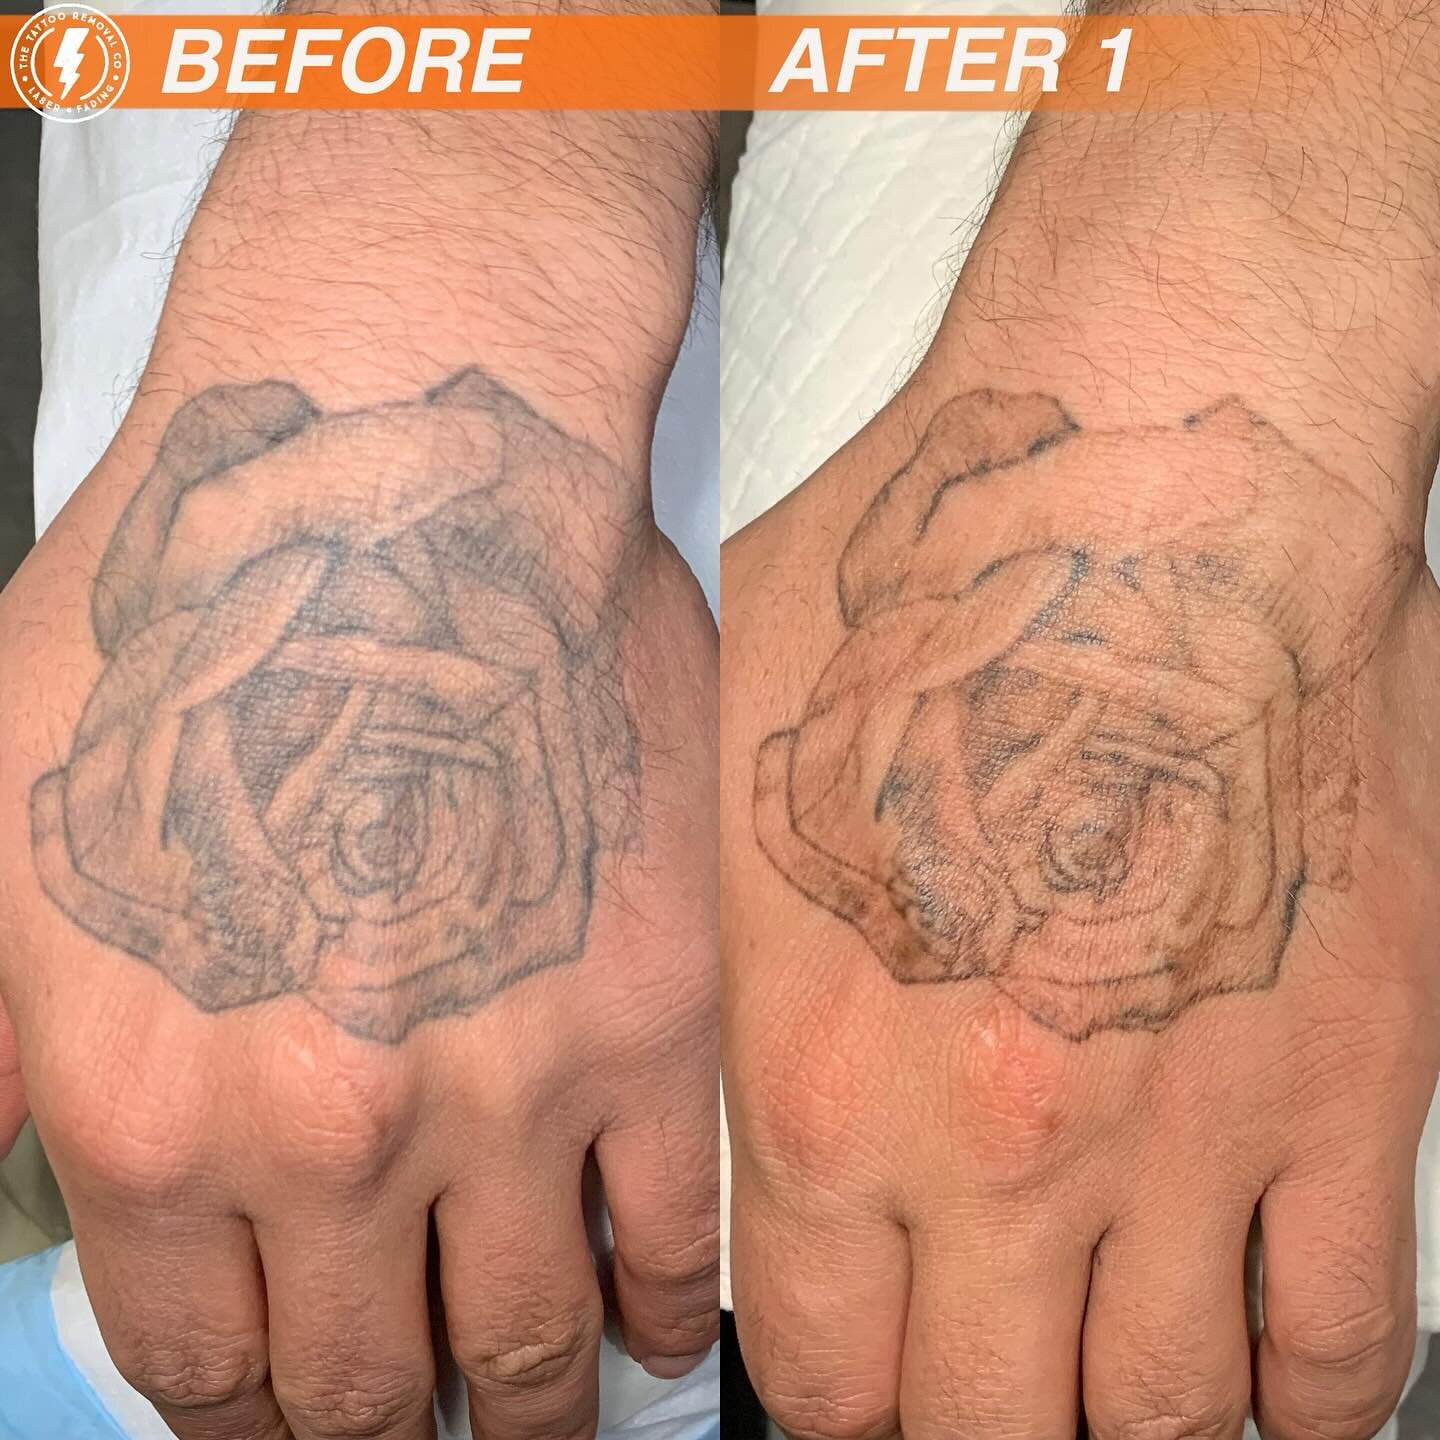 Aggregate more than 125 rose tattoo removal